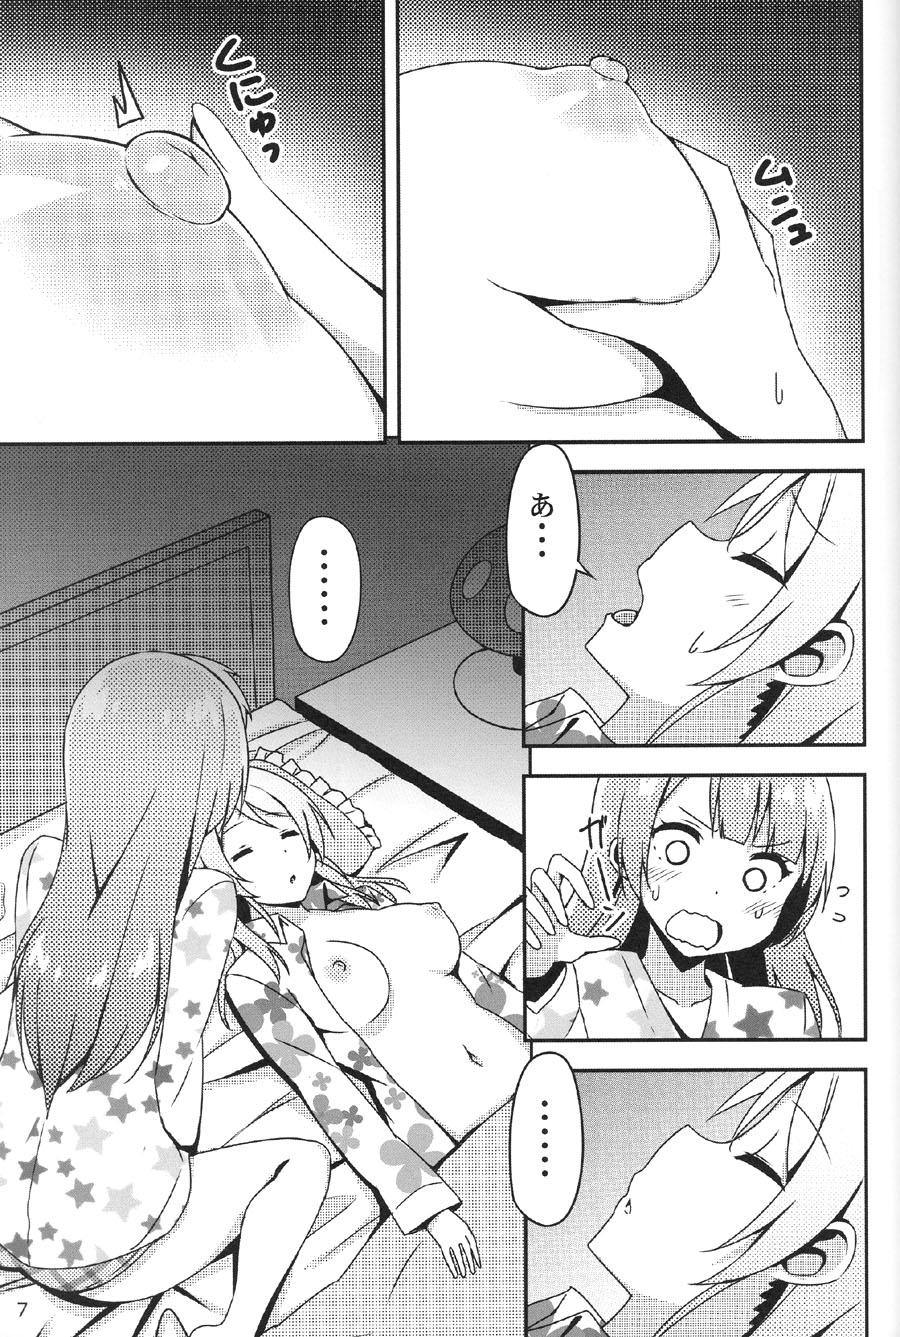 Gostosa Endless Love - Love live Anime - Page 6